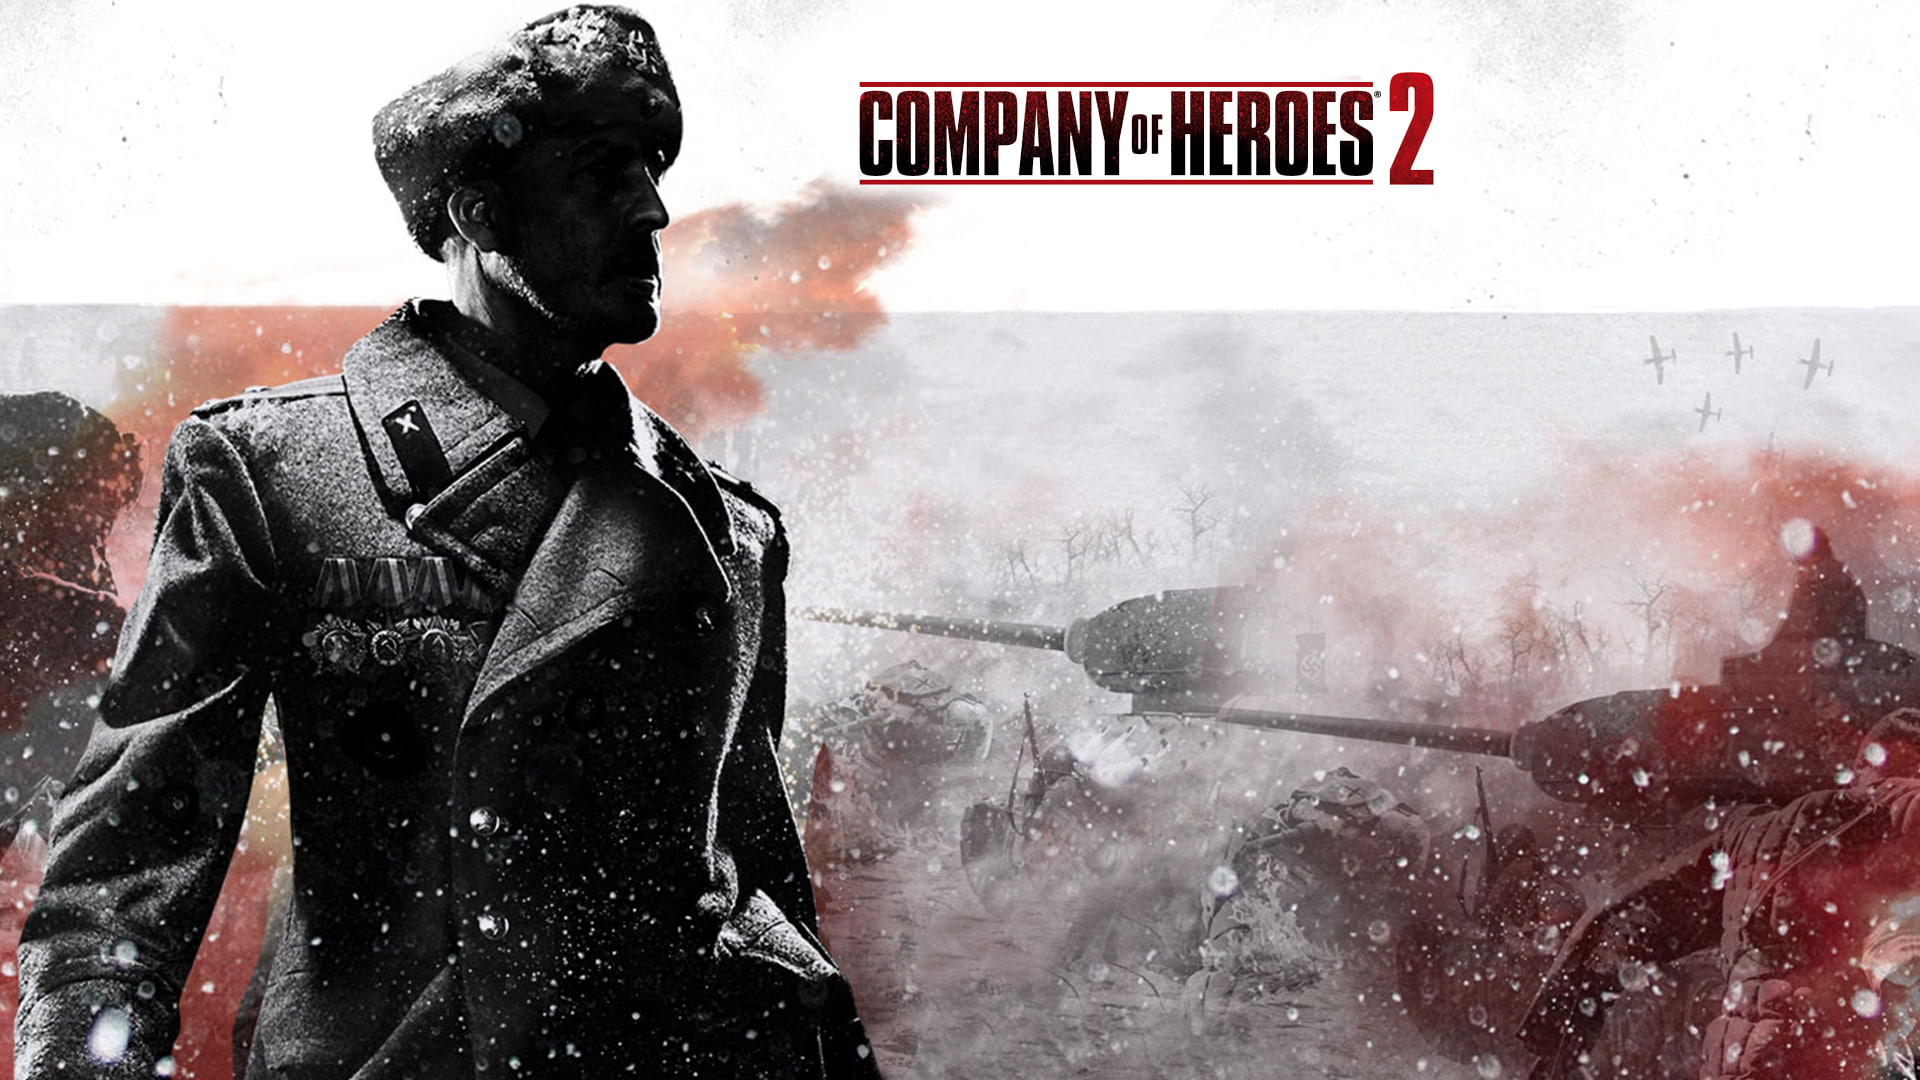 Company Of Heroes 2, communication, one person, text, sign, clothing